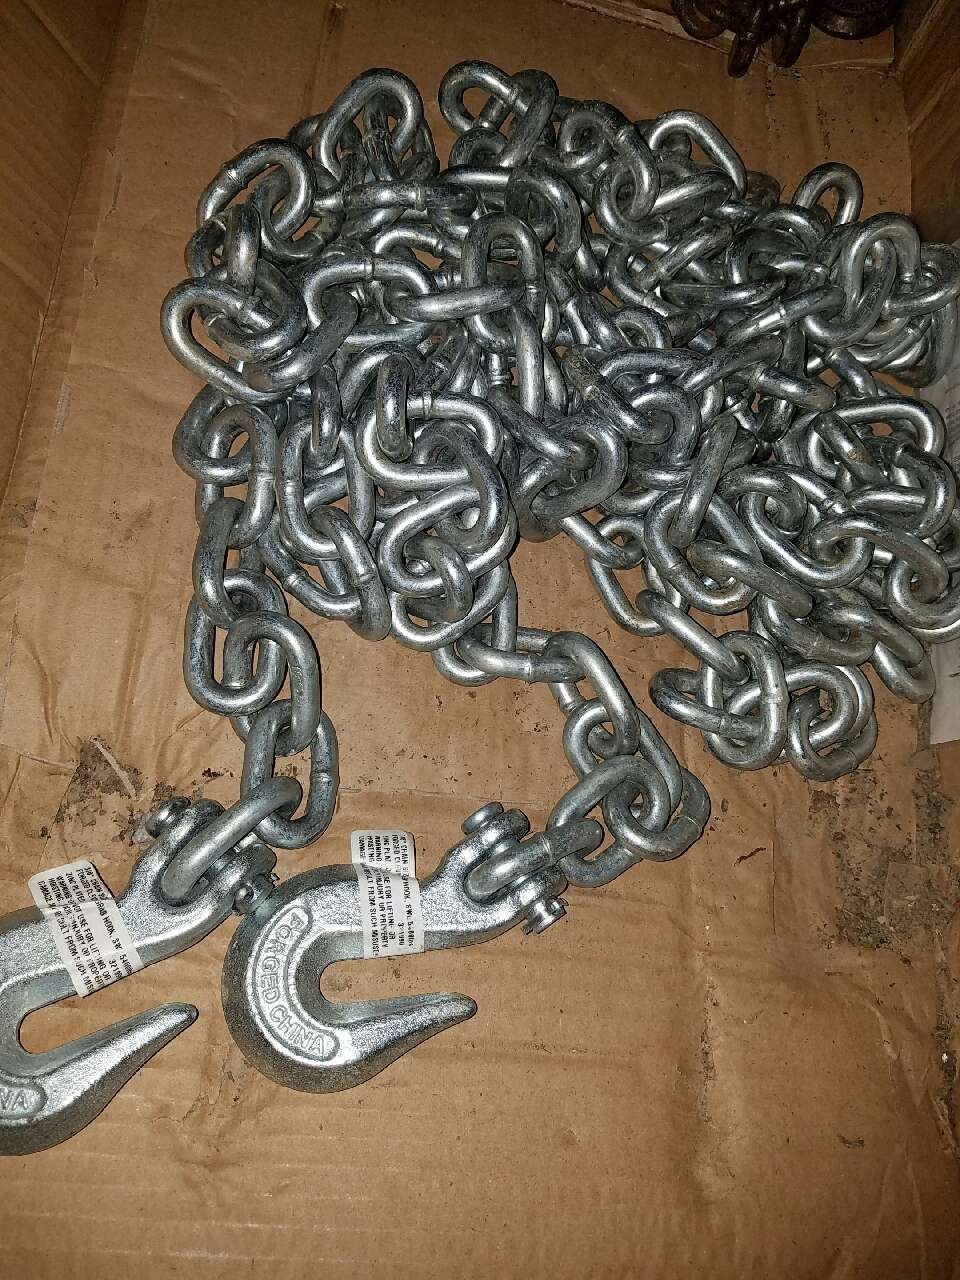 New 20 ft 3/8 steel chain.